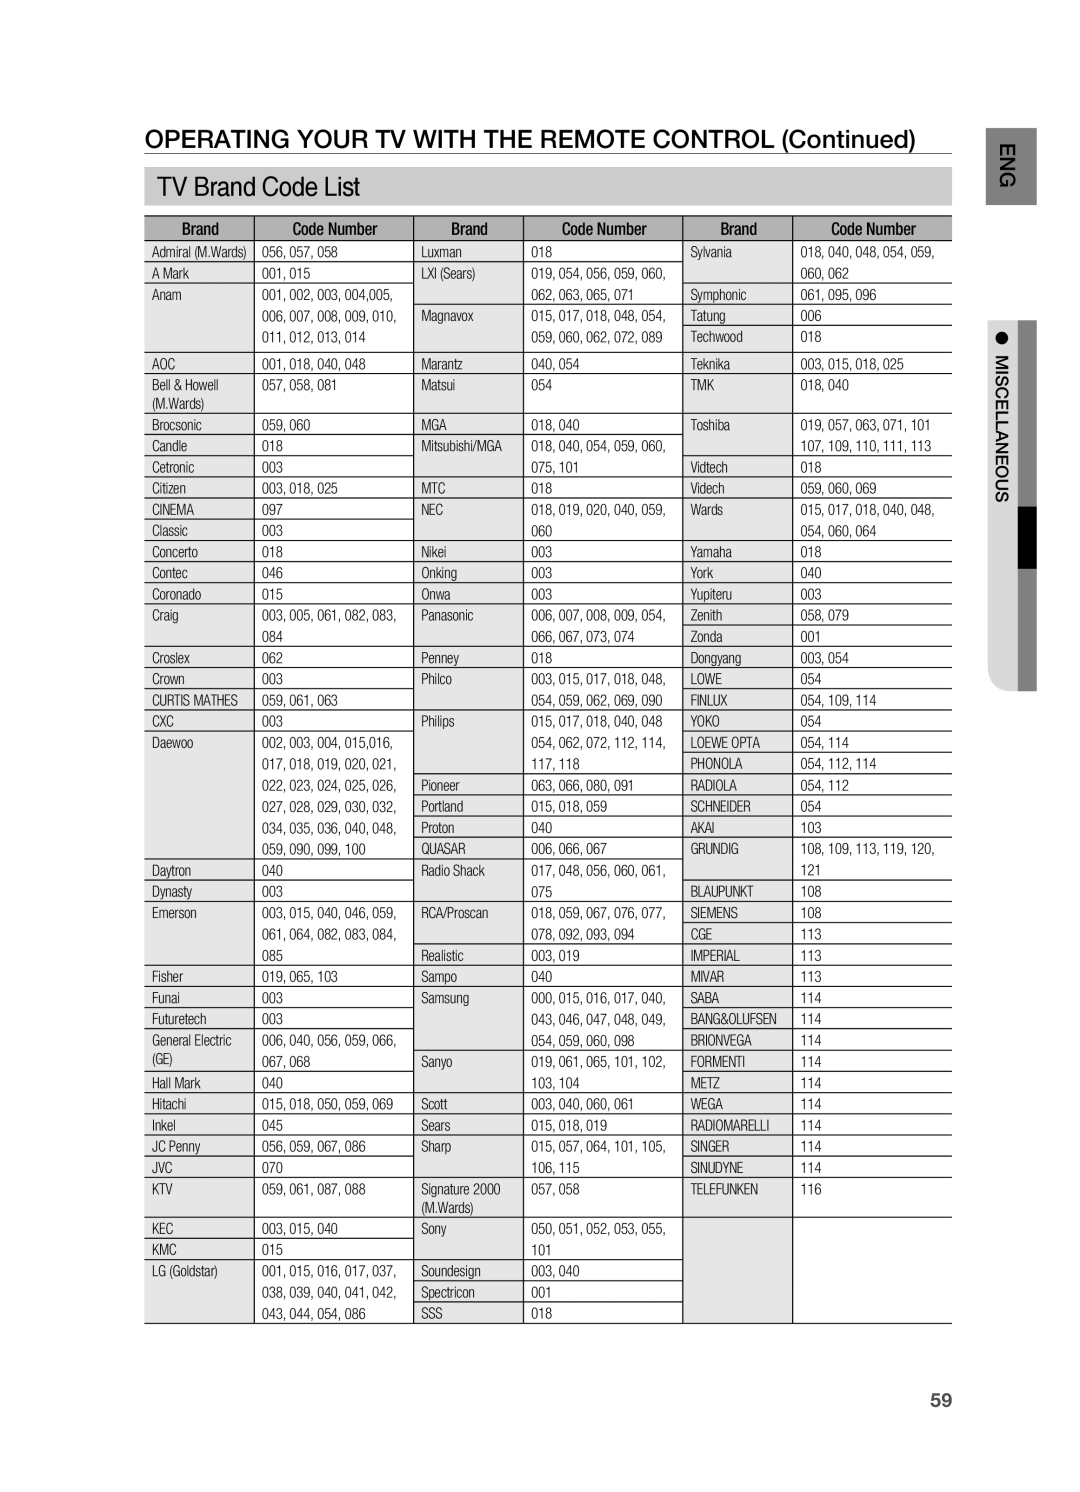 Samsung HT-AS730S user manual TV Brand Code List, Code Number, Miscellaneous 